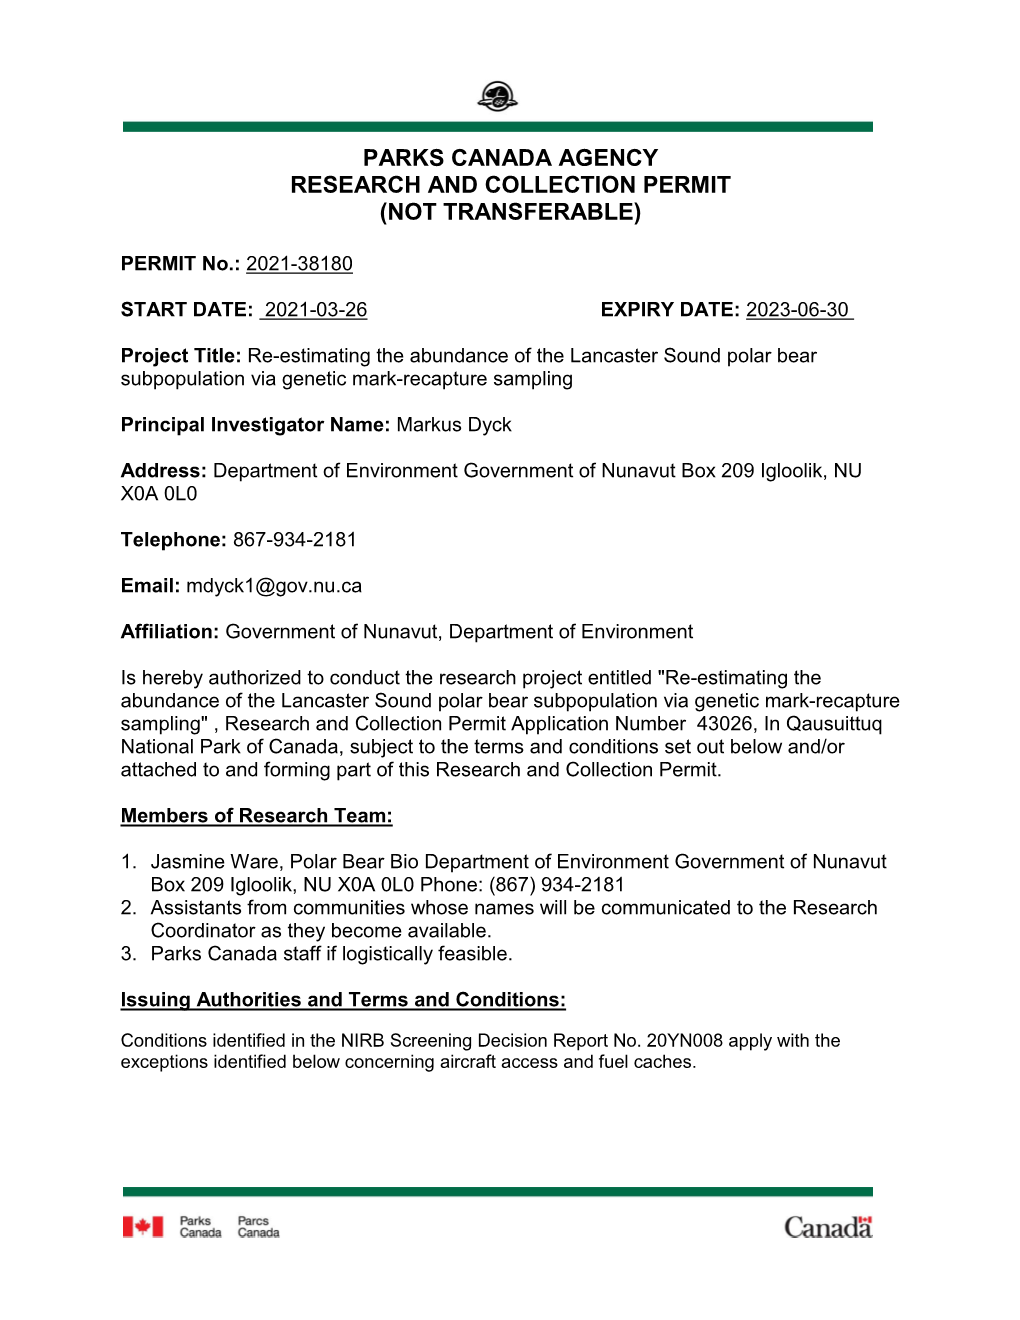 Parks Canada Agency Research and Collection Permit (Not Transferable)